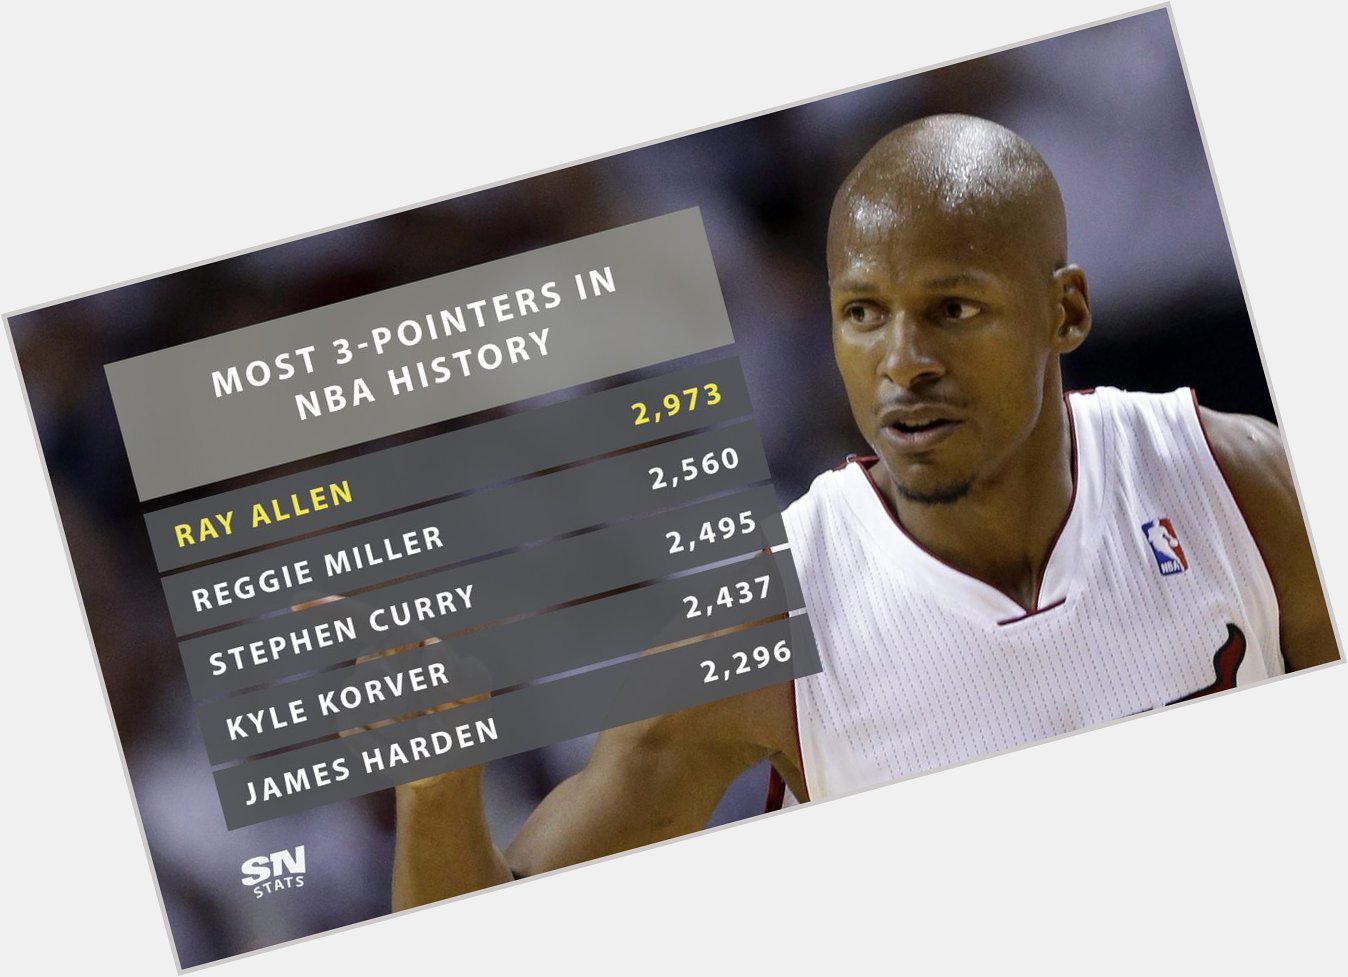 Happy 45th Birthday Ray Allen! He has made the most 3-pointers3  in NBA history with 2,973. 